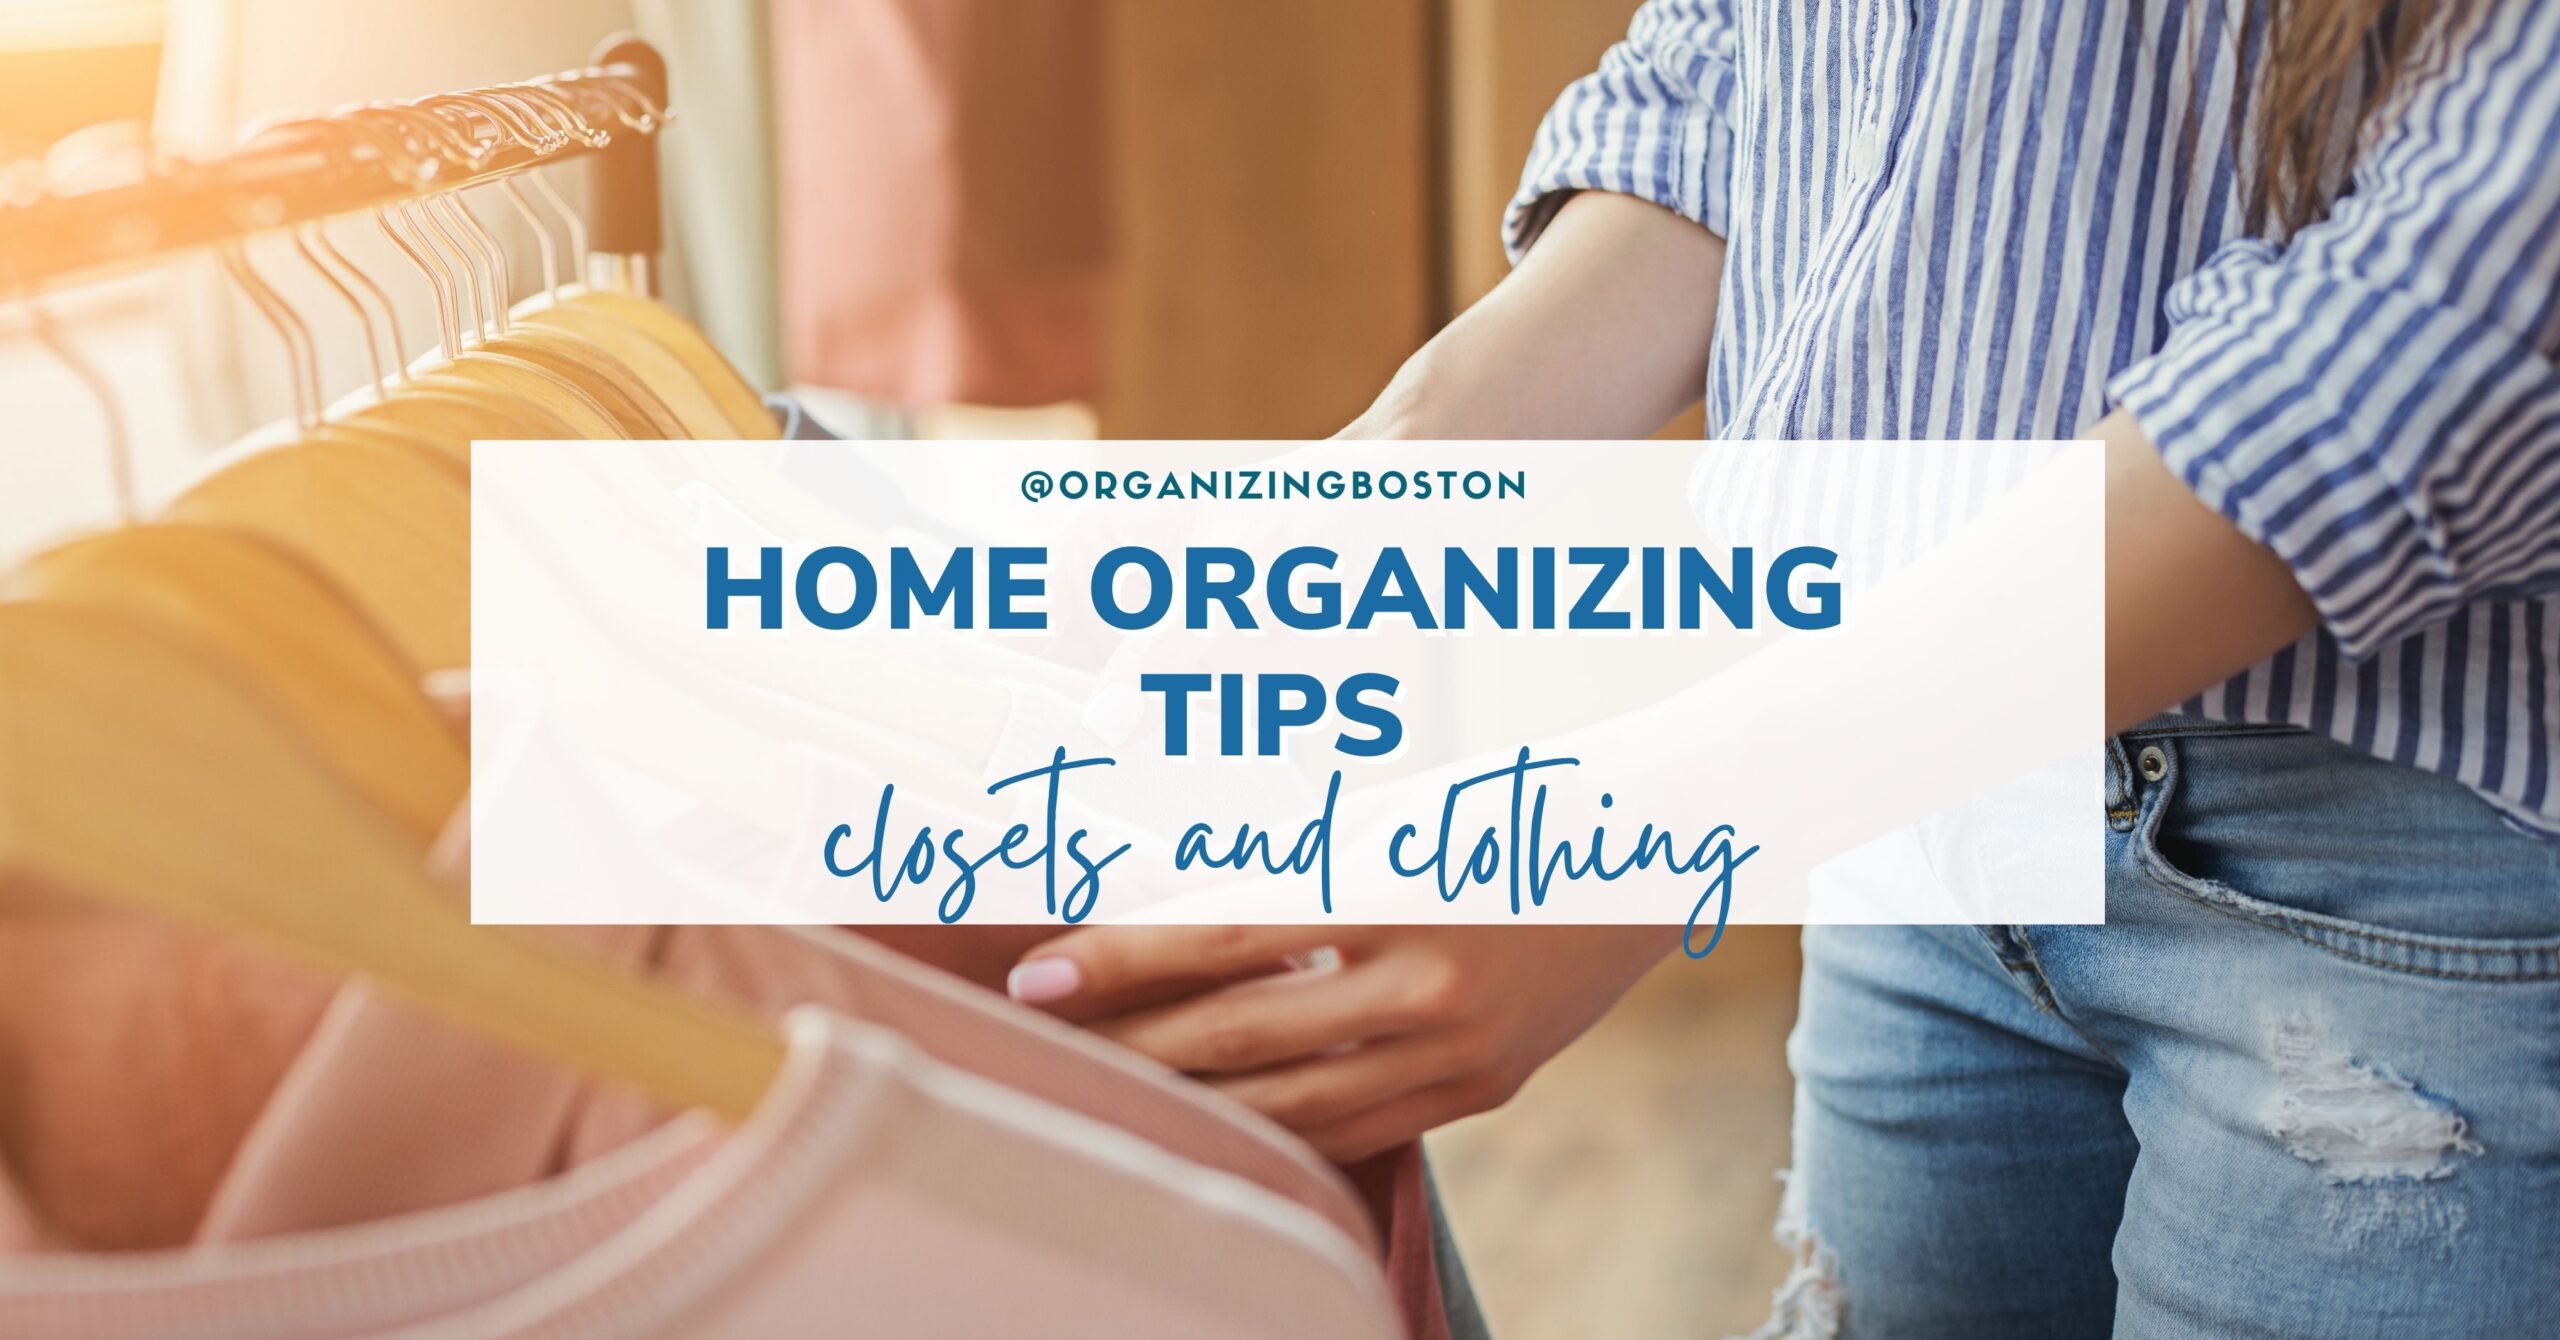 Home Organizing Tips – Closets and Clothing